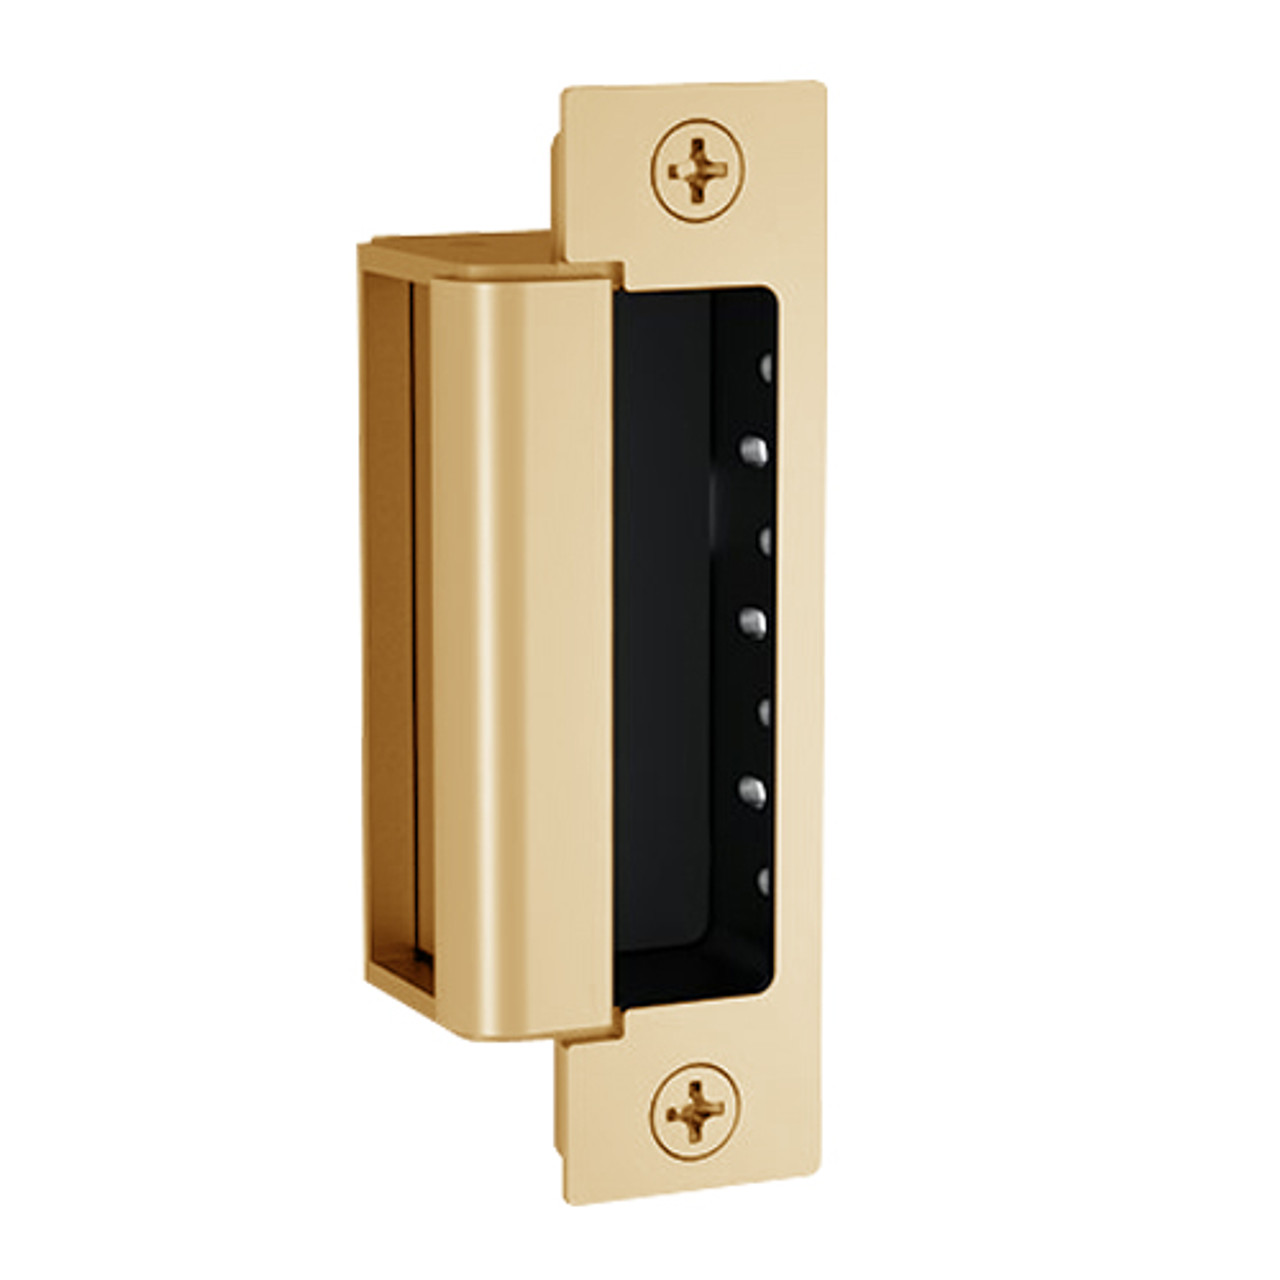 1600-DLM-612 Hes 1600 Series Dynamic Low Profile Electric Strike Bodies with Dual Lock Monitor in Satin Bronze